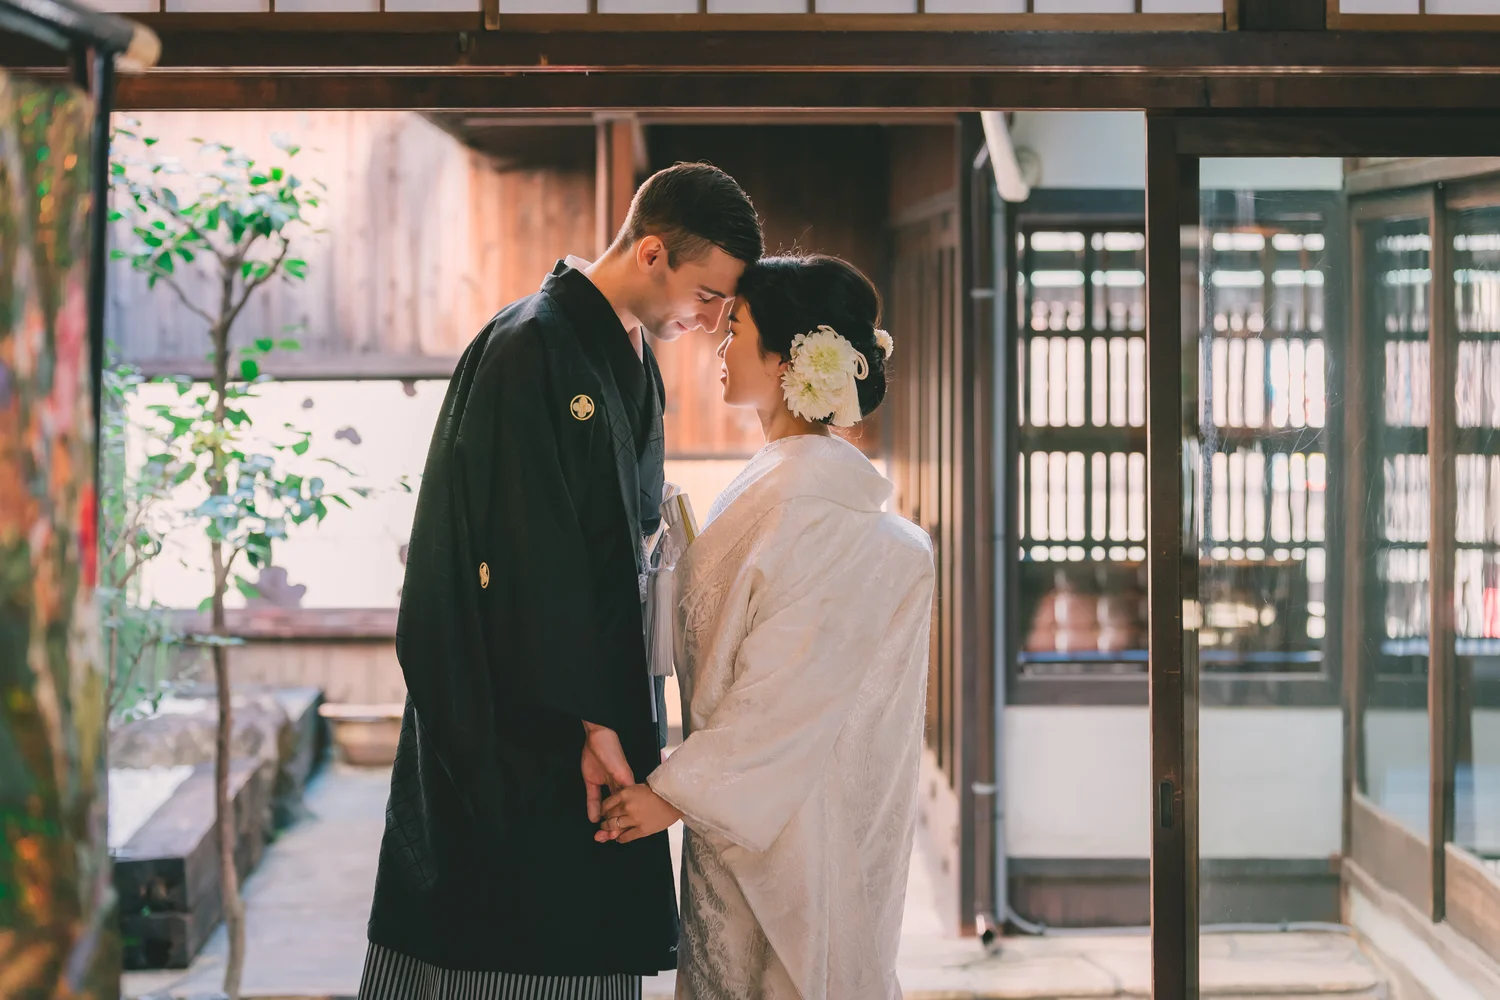 Kyoto Pre Wedding, Post Wedding Photos in Old Japanese House